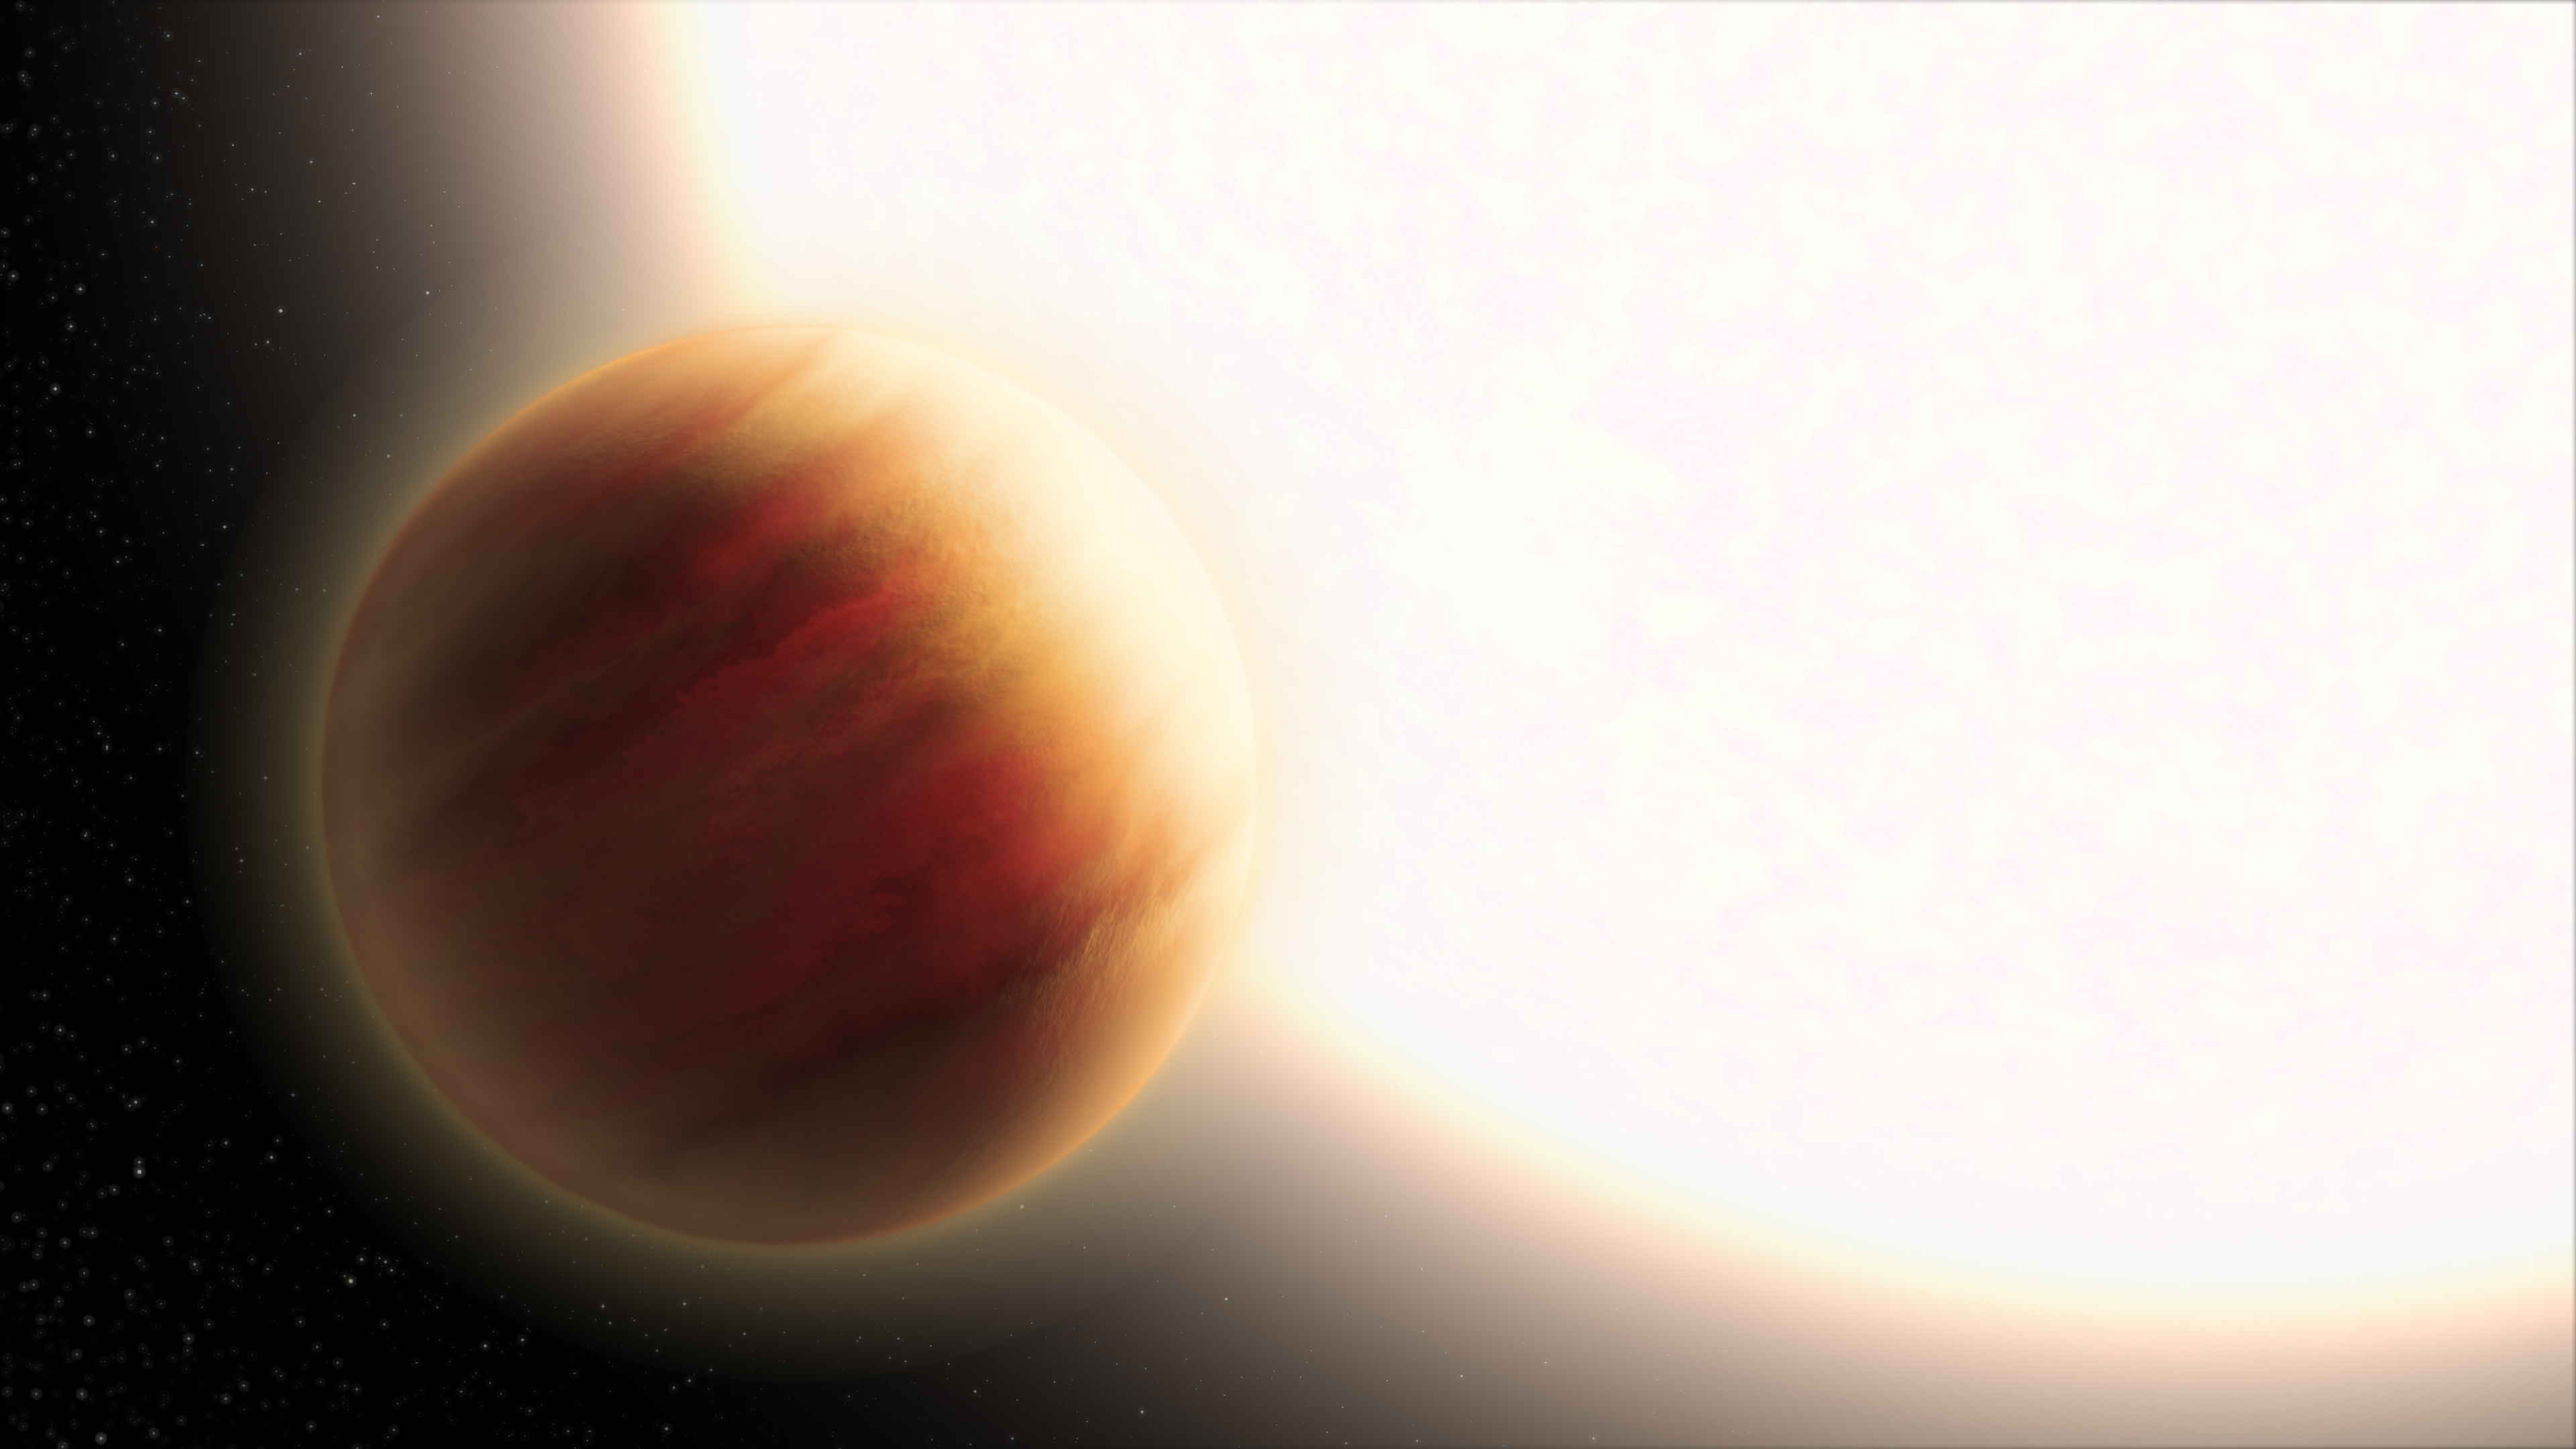 An artist’s illustration of WASP-79b, a “hot Jupiter” exoplanet with a strange — and so far unexplainable — phenomenon happening in its atmosphere.